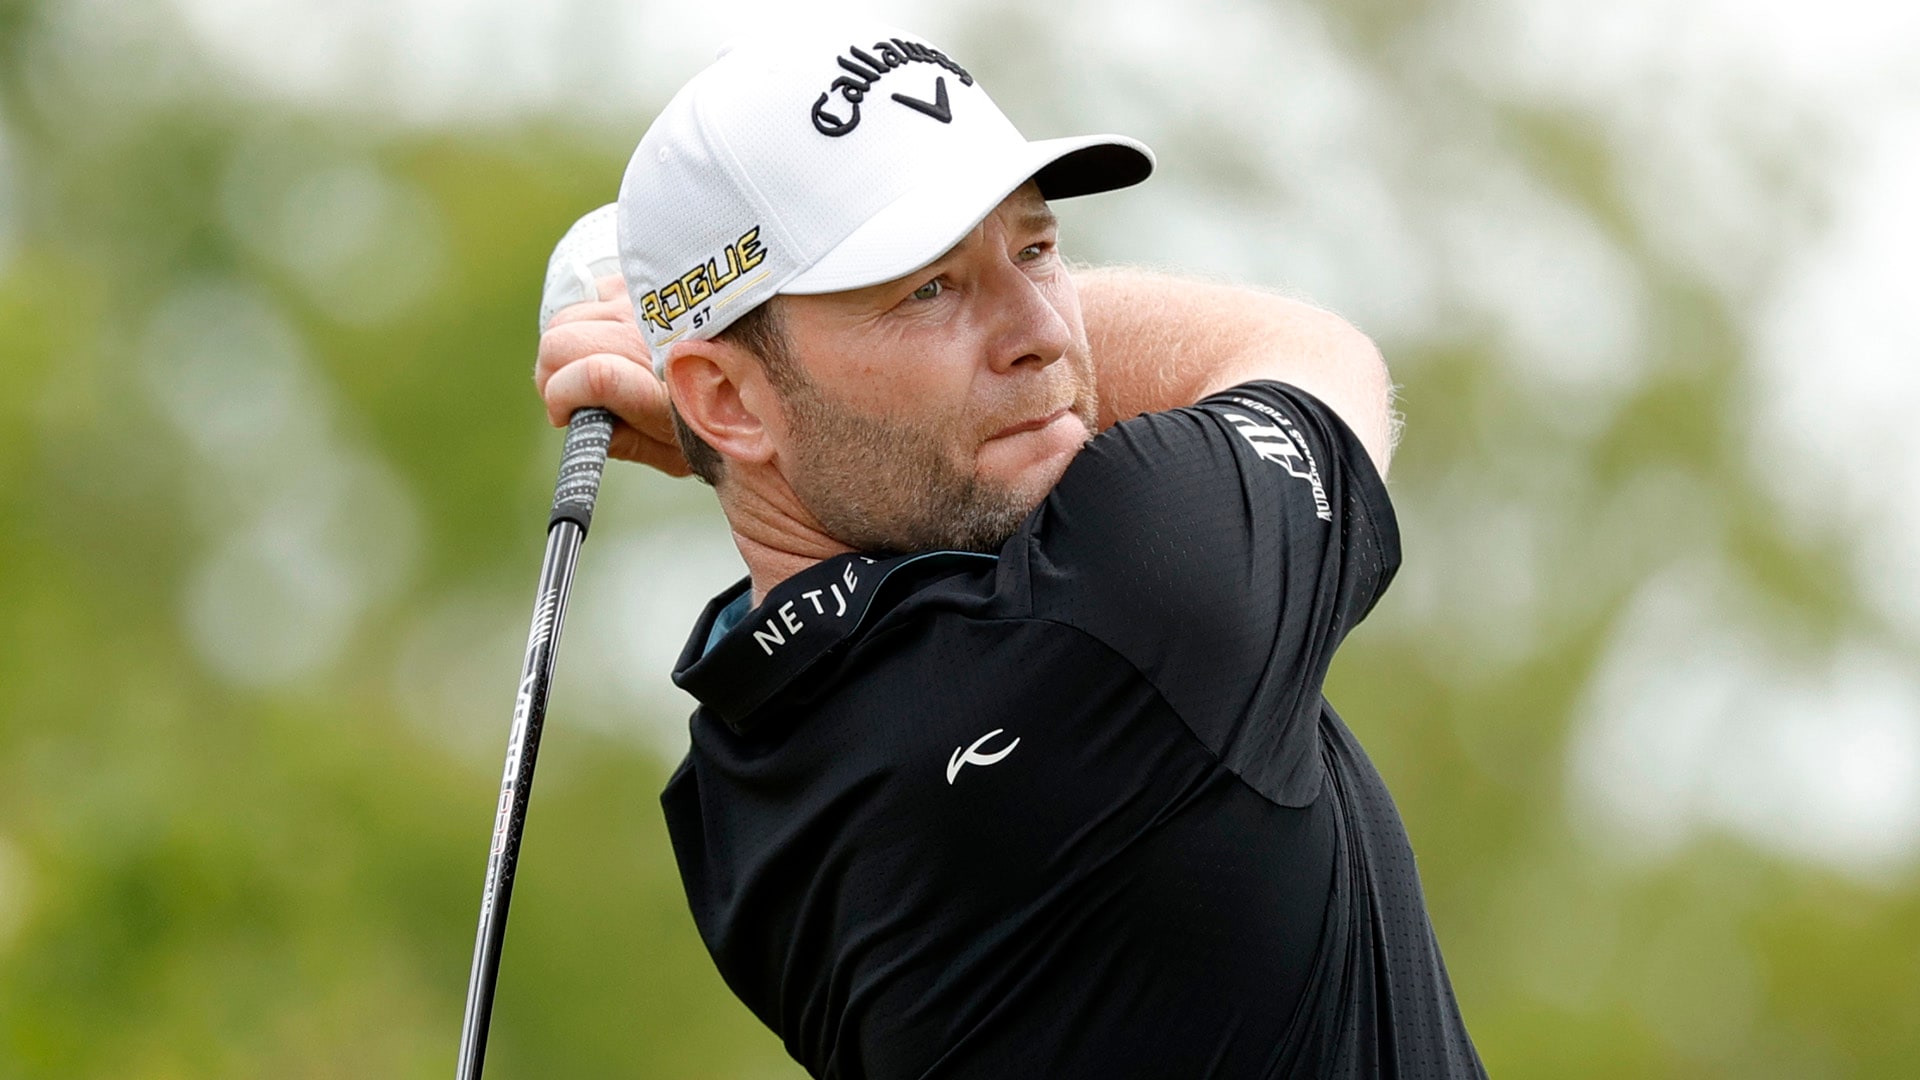 Branden Grace takes penalty after drive lands in tree root